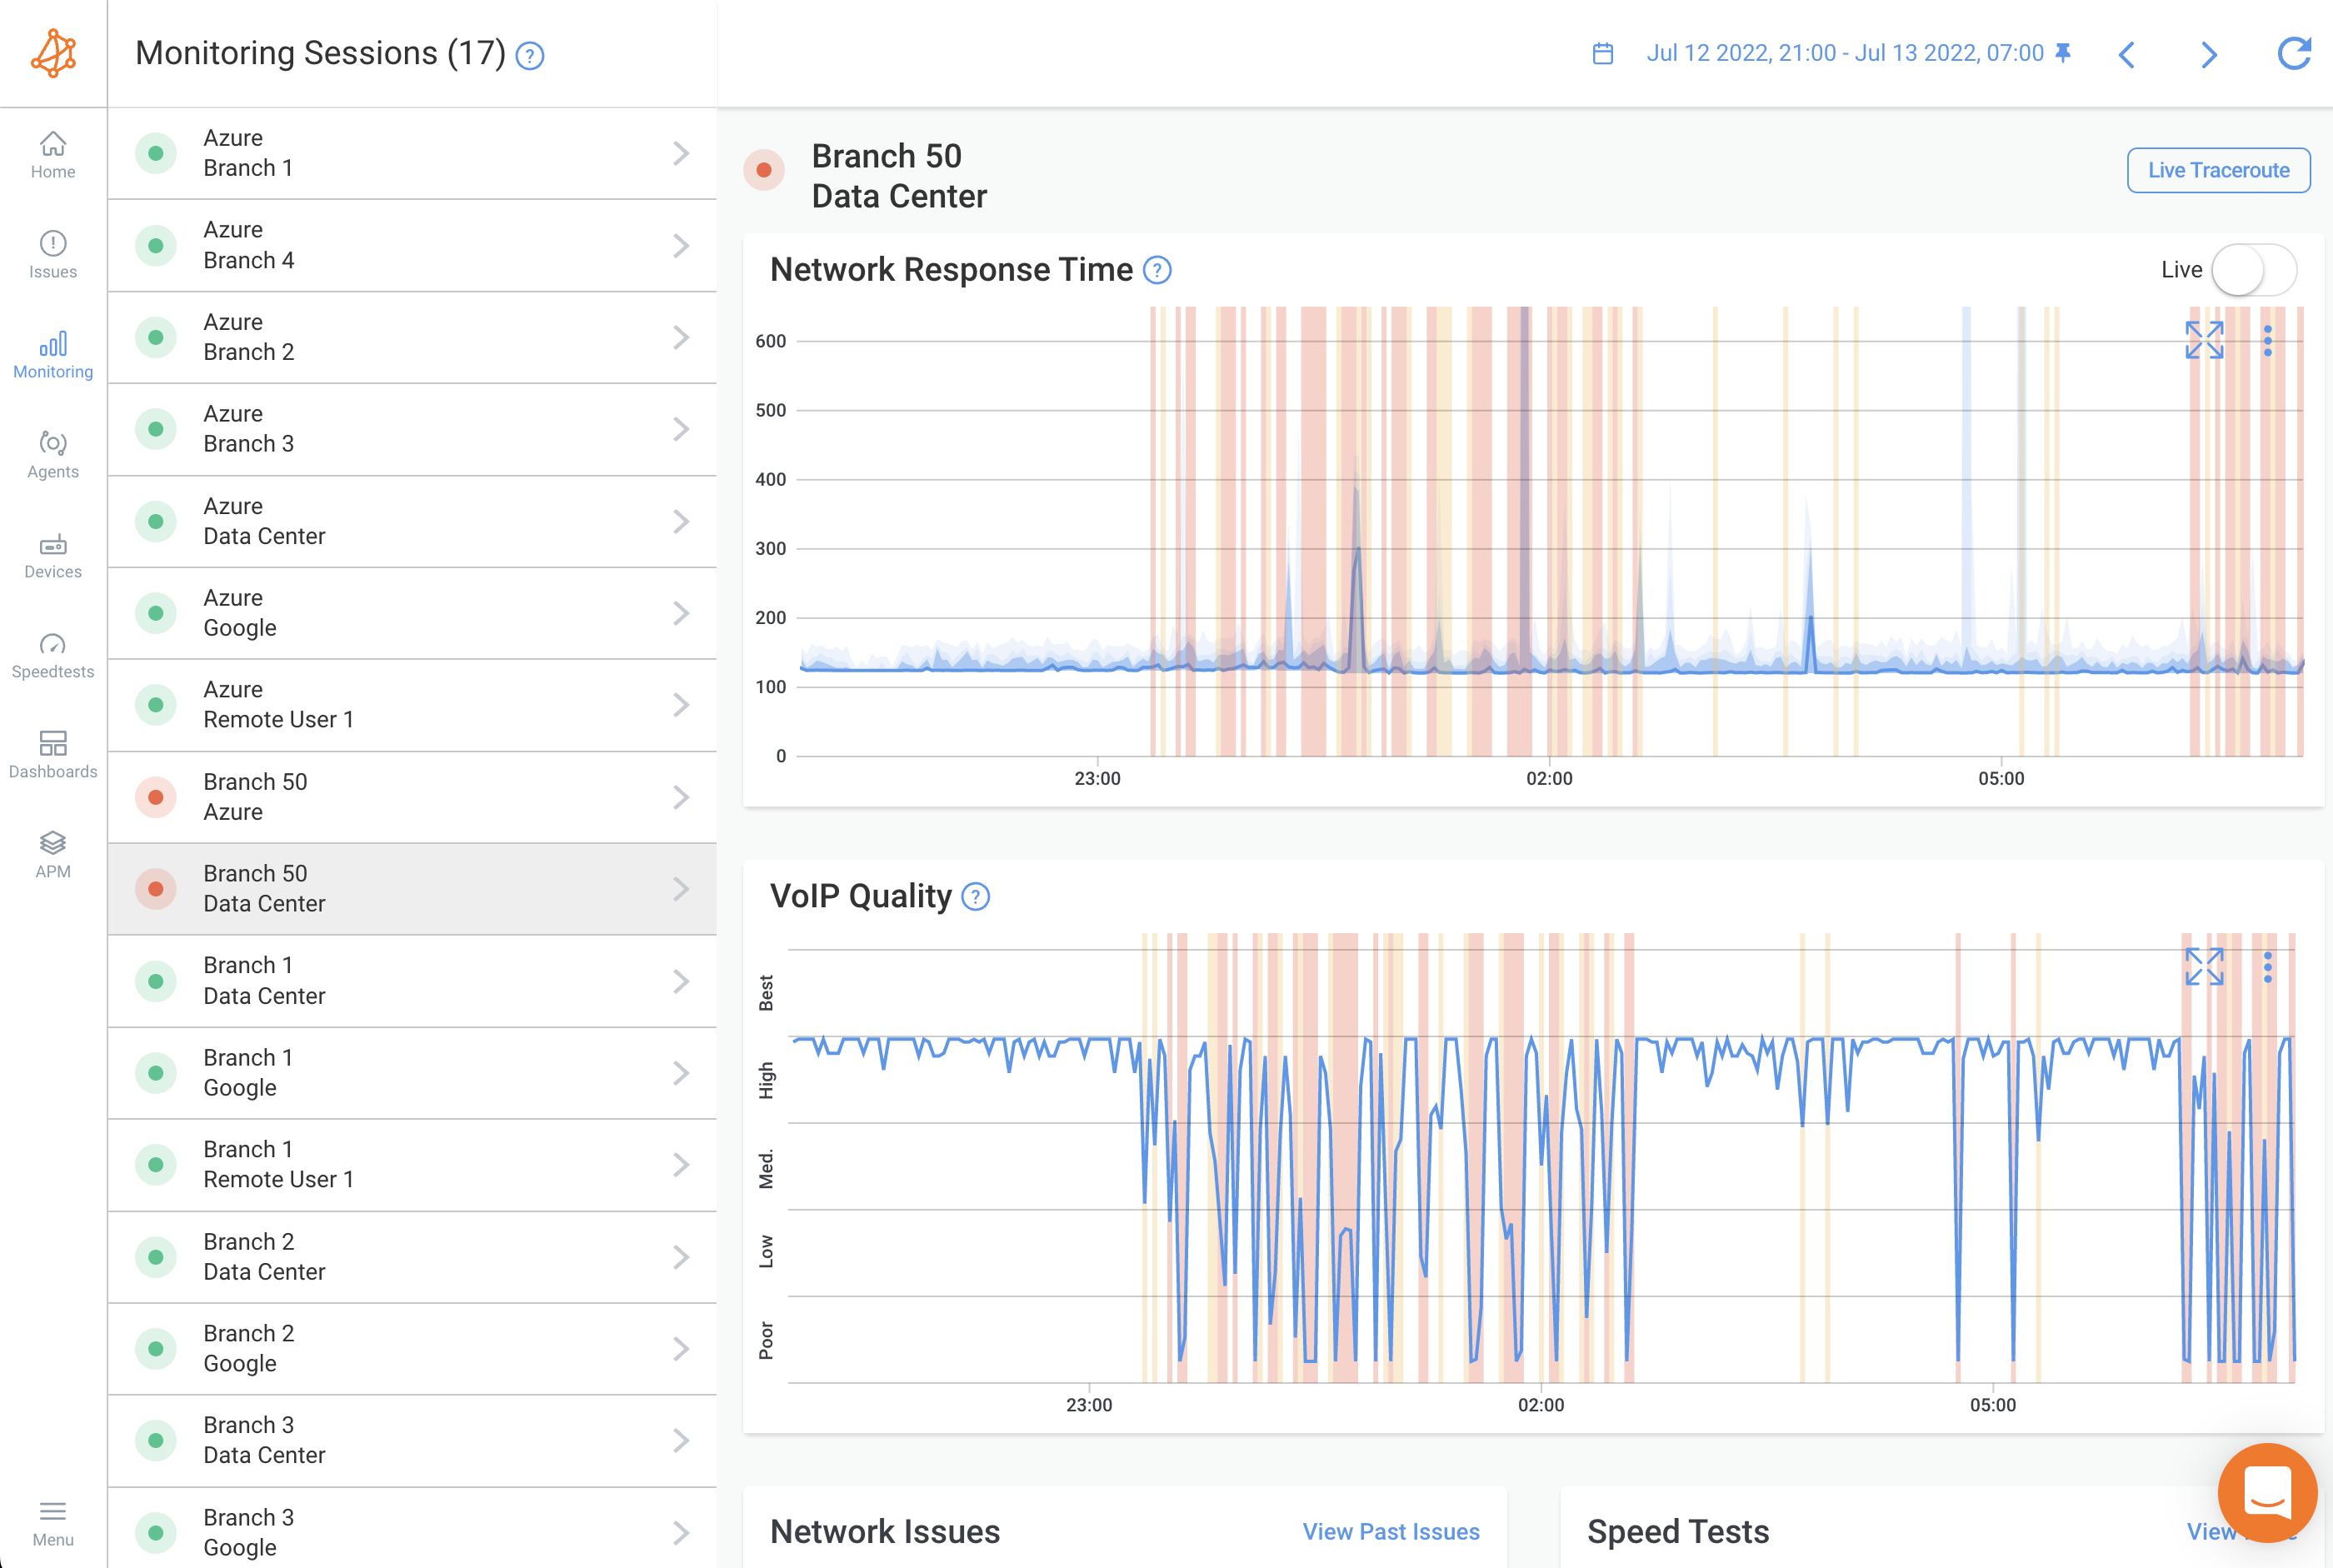 Obkio Network Performance Monitoring - Network Response Time & VoIP Quality Graphs